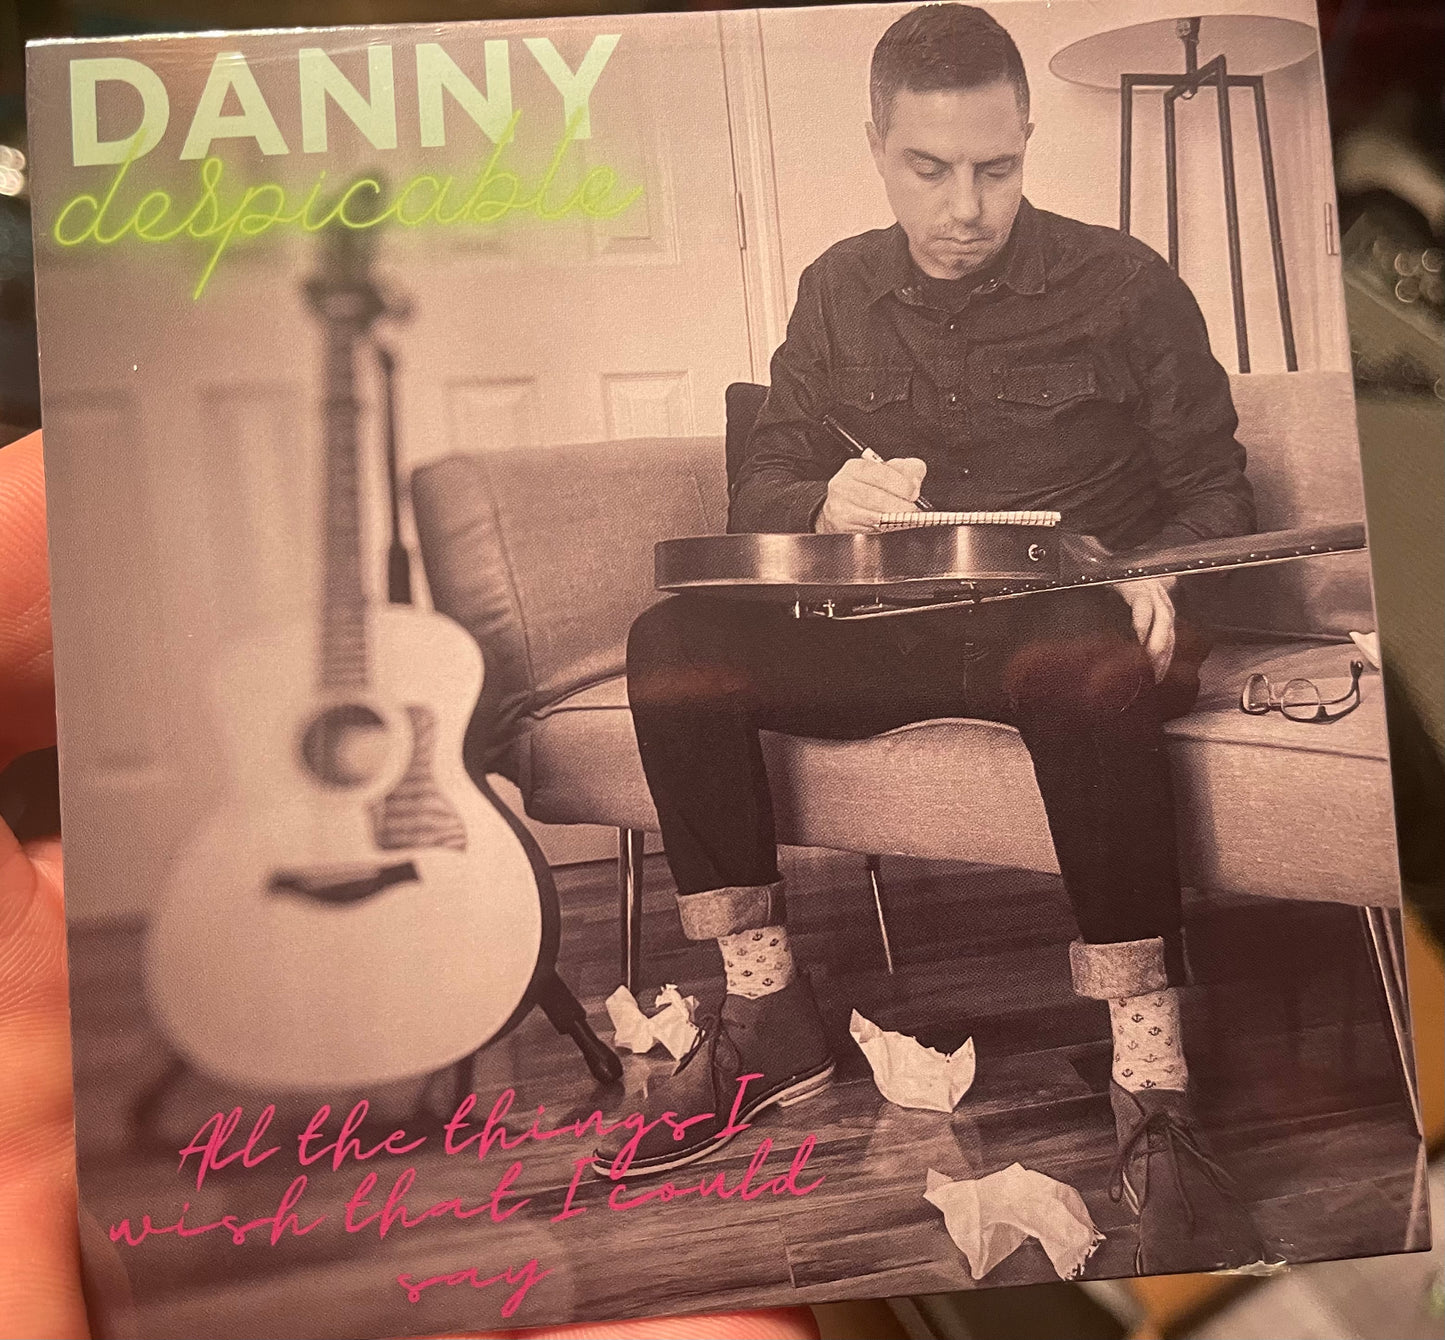 OMR-053 Danny Despicable “All The Things I Wish That I Could Say” CD/EP